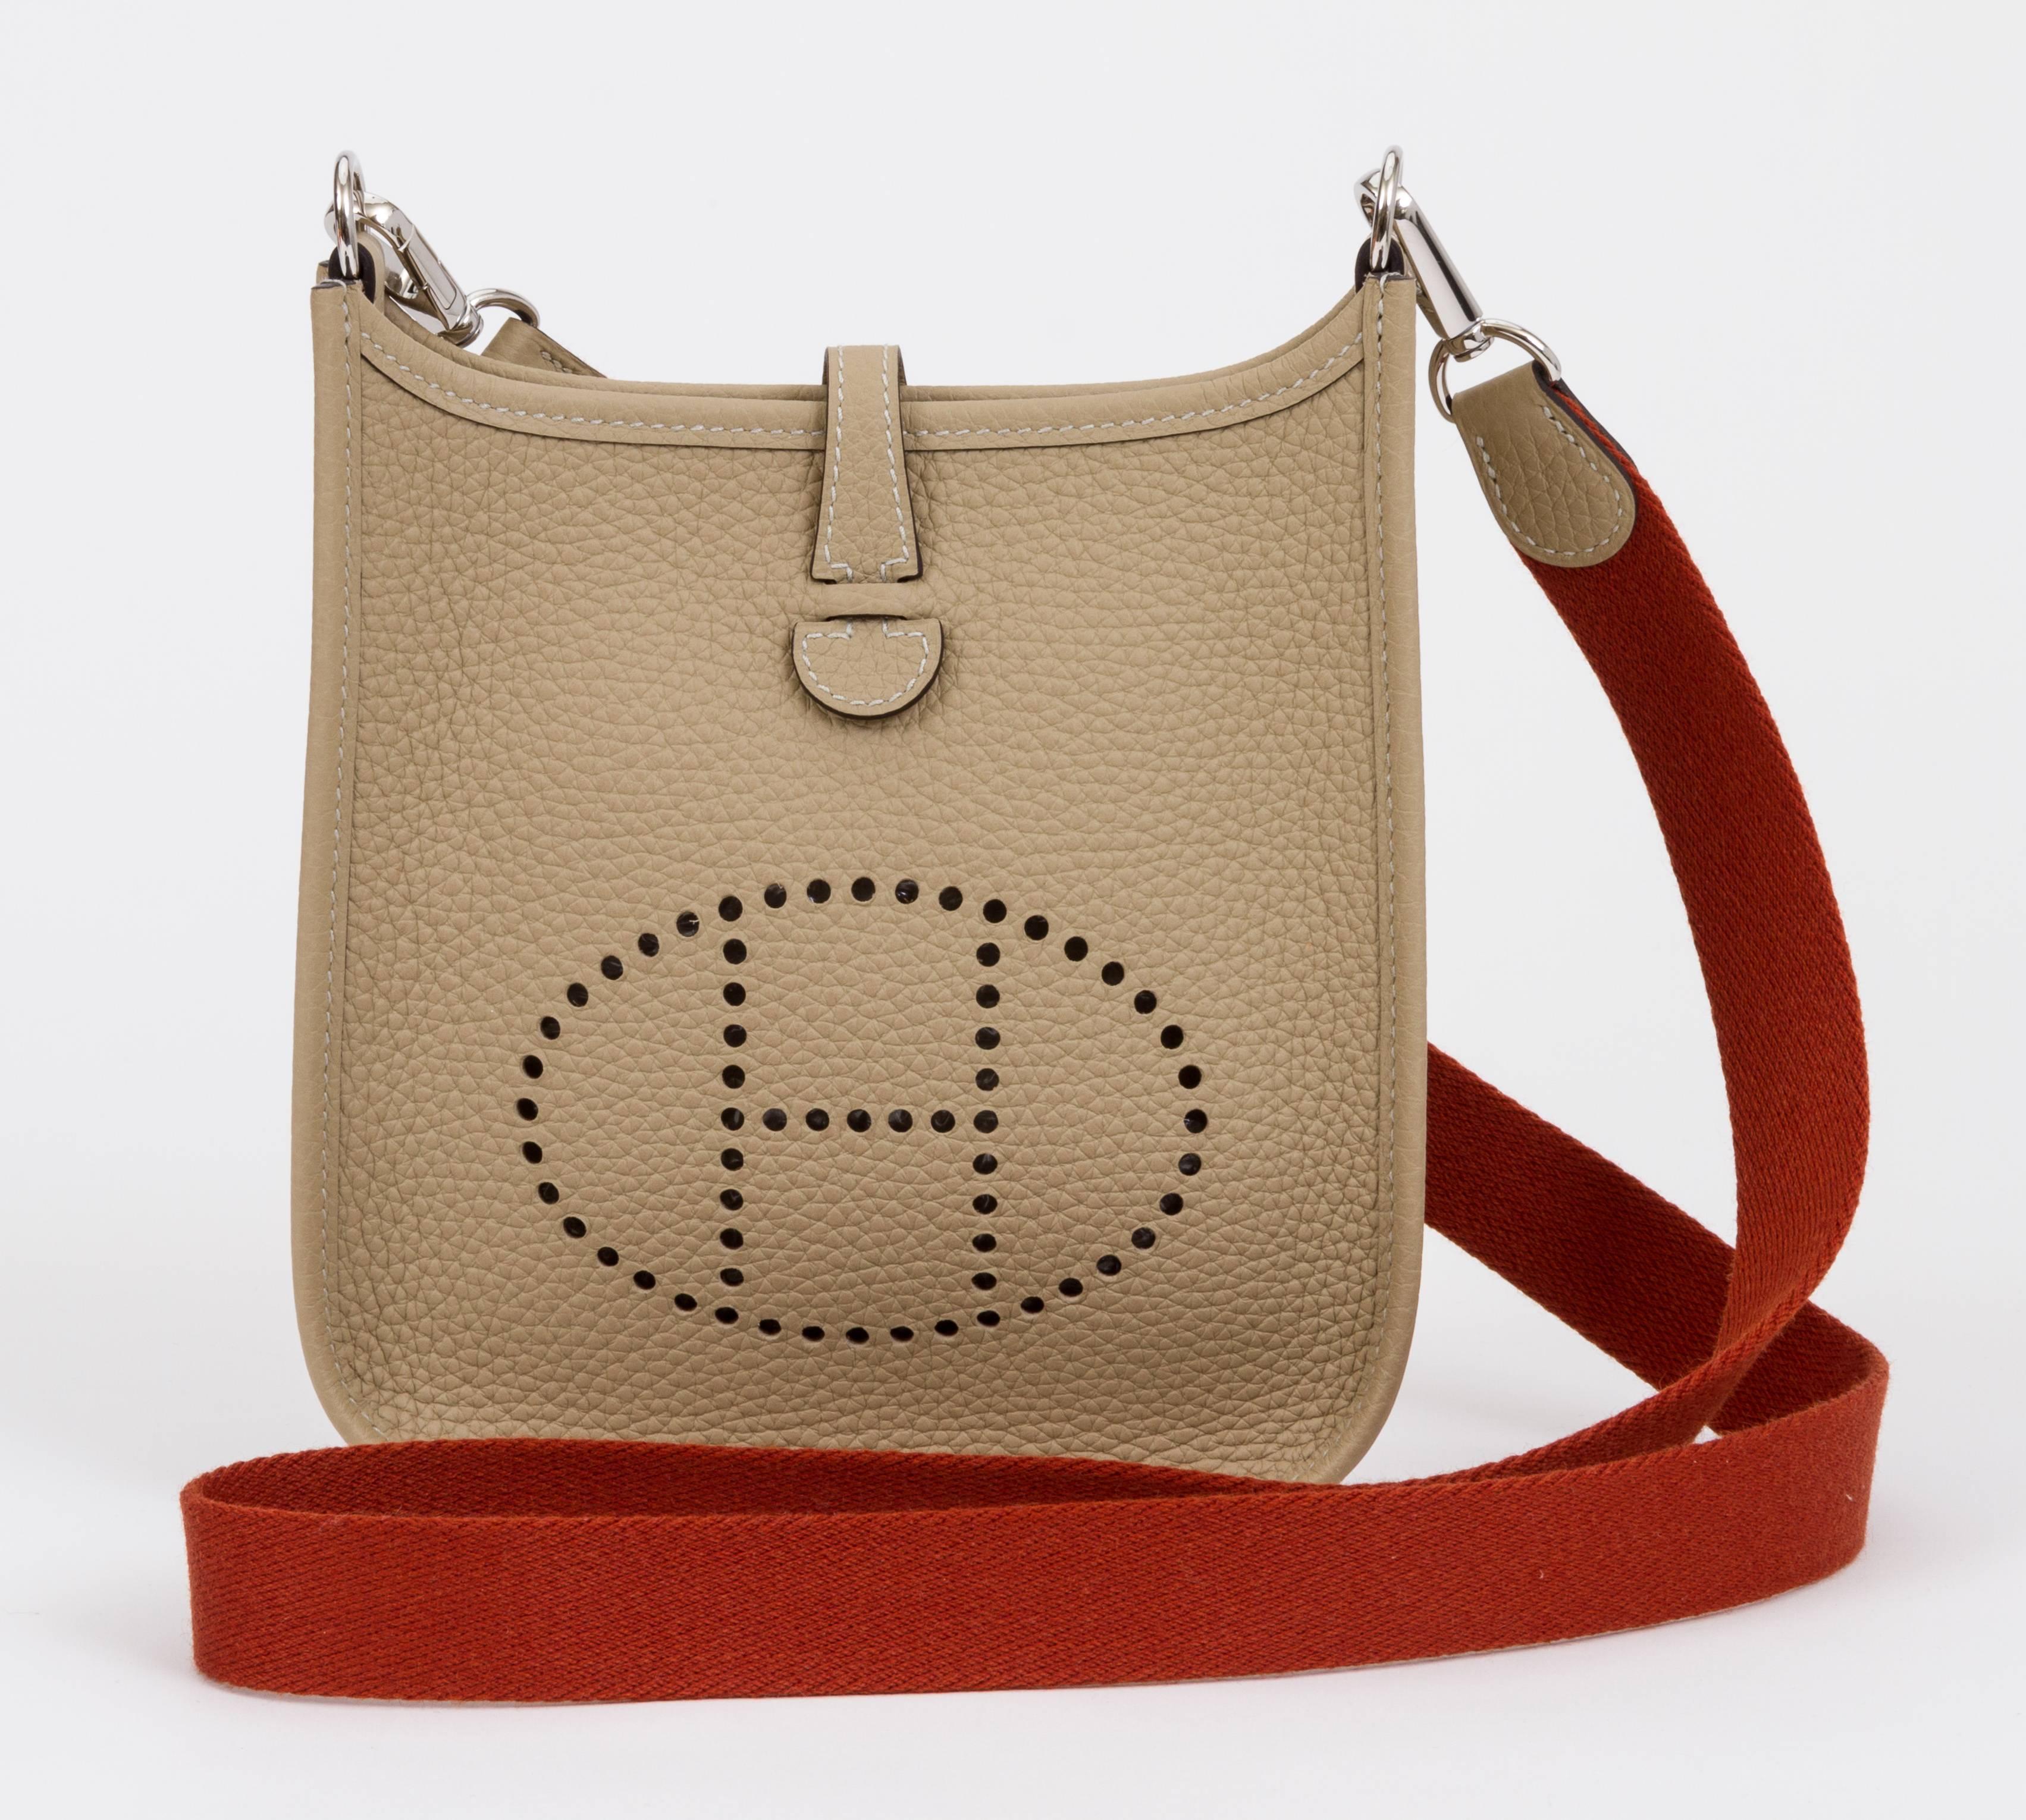 Hermès mini Evelyne shoulder bag in trench clemence leather with palladium hardware. Contrast strap in rust color and trench leather. Never used. Dated 